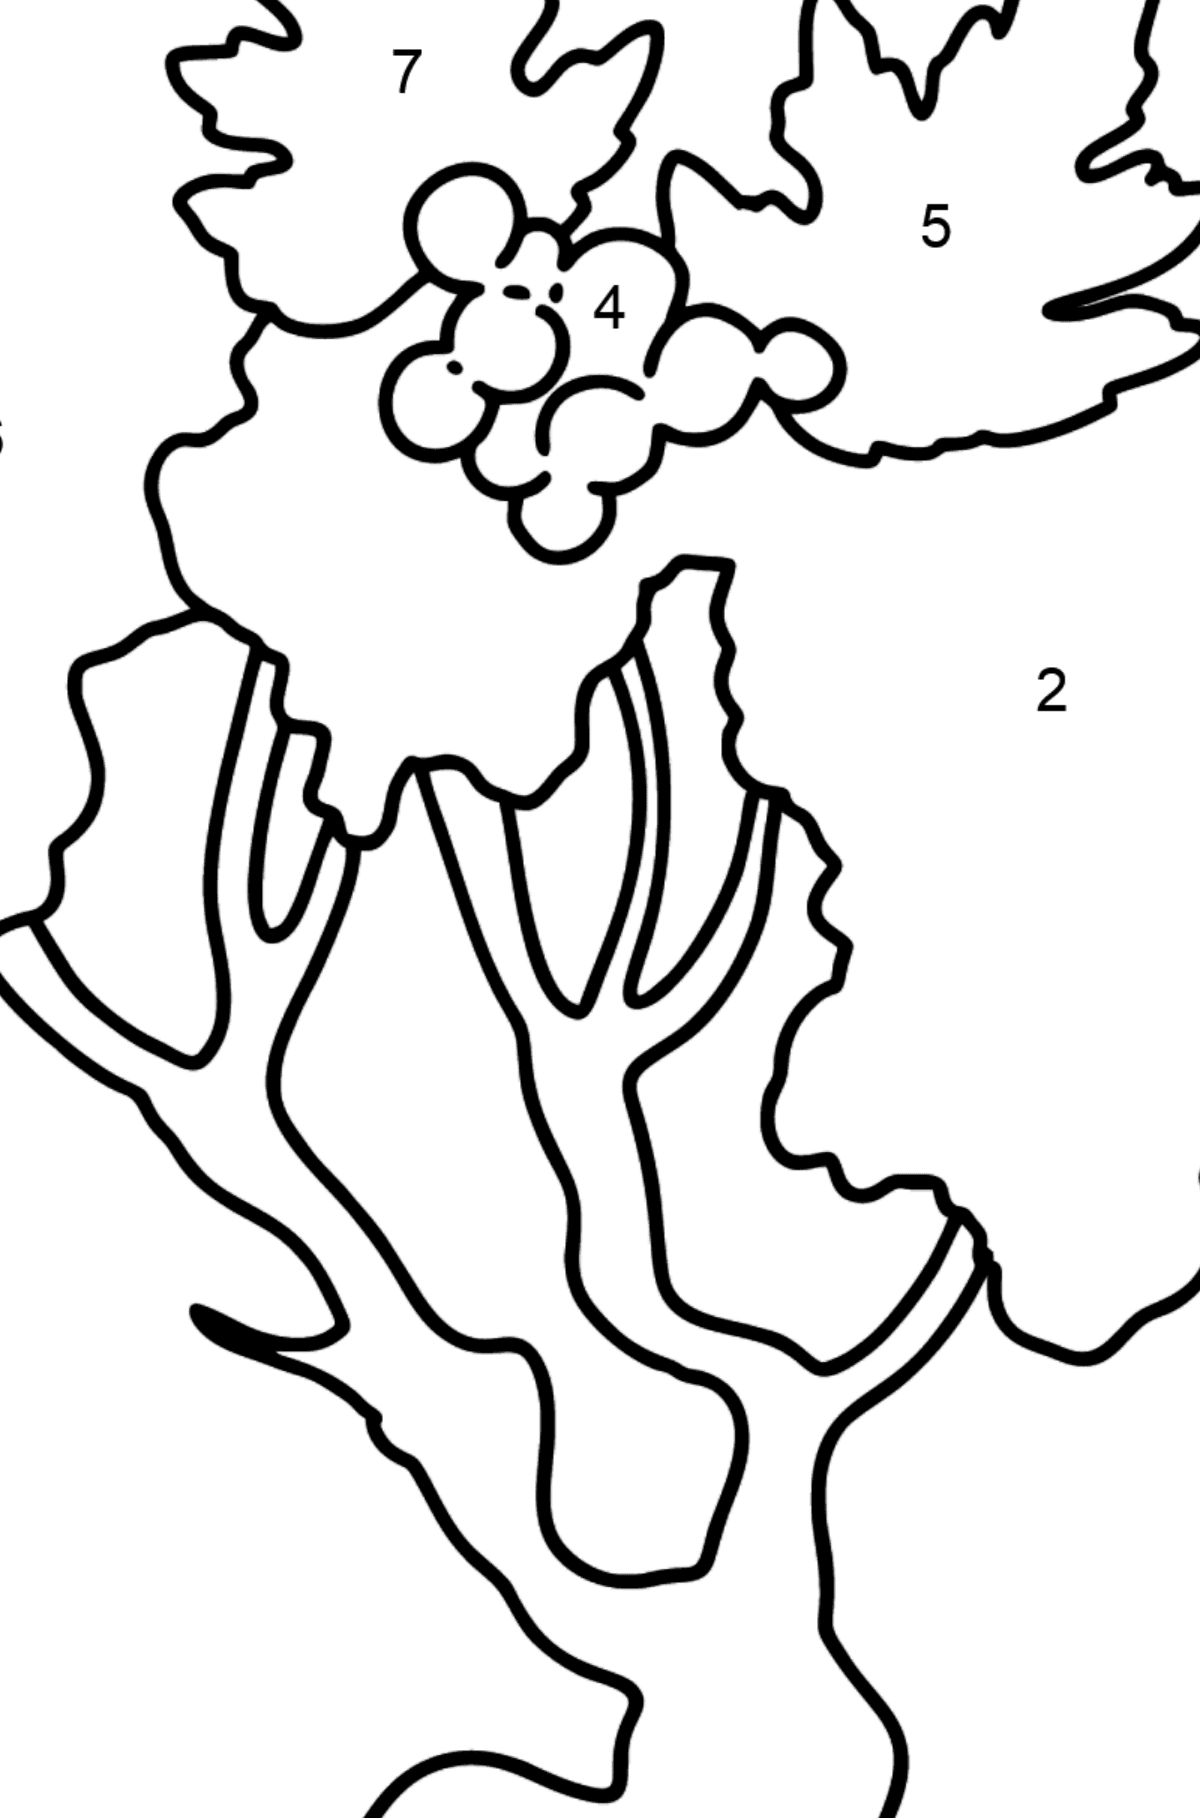 Hawthorn coloring page - Coloring by Numbers for Kids